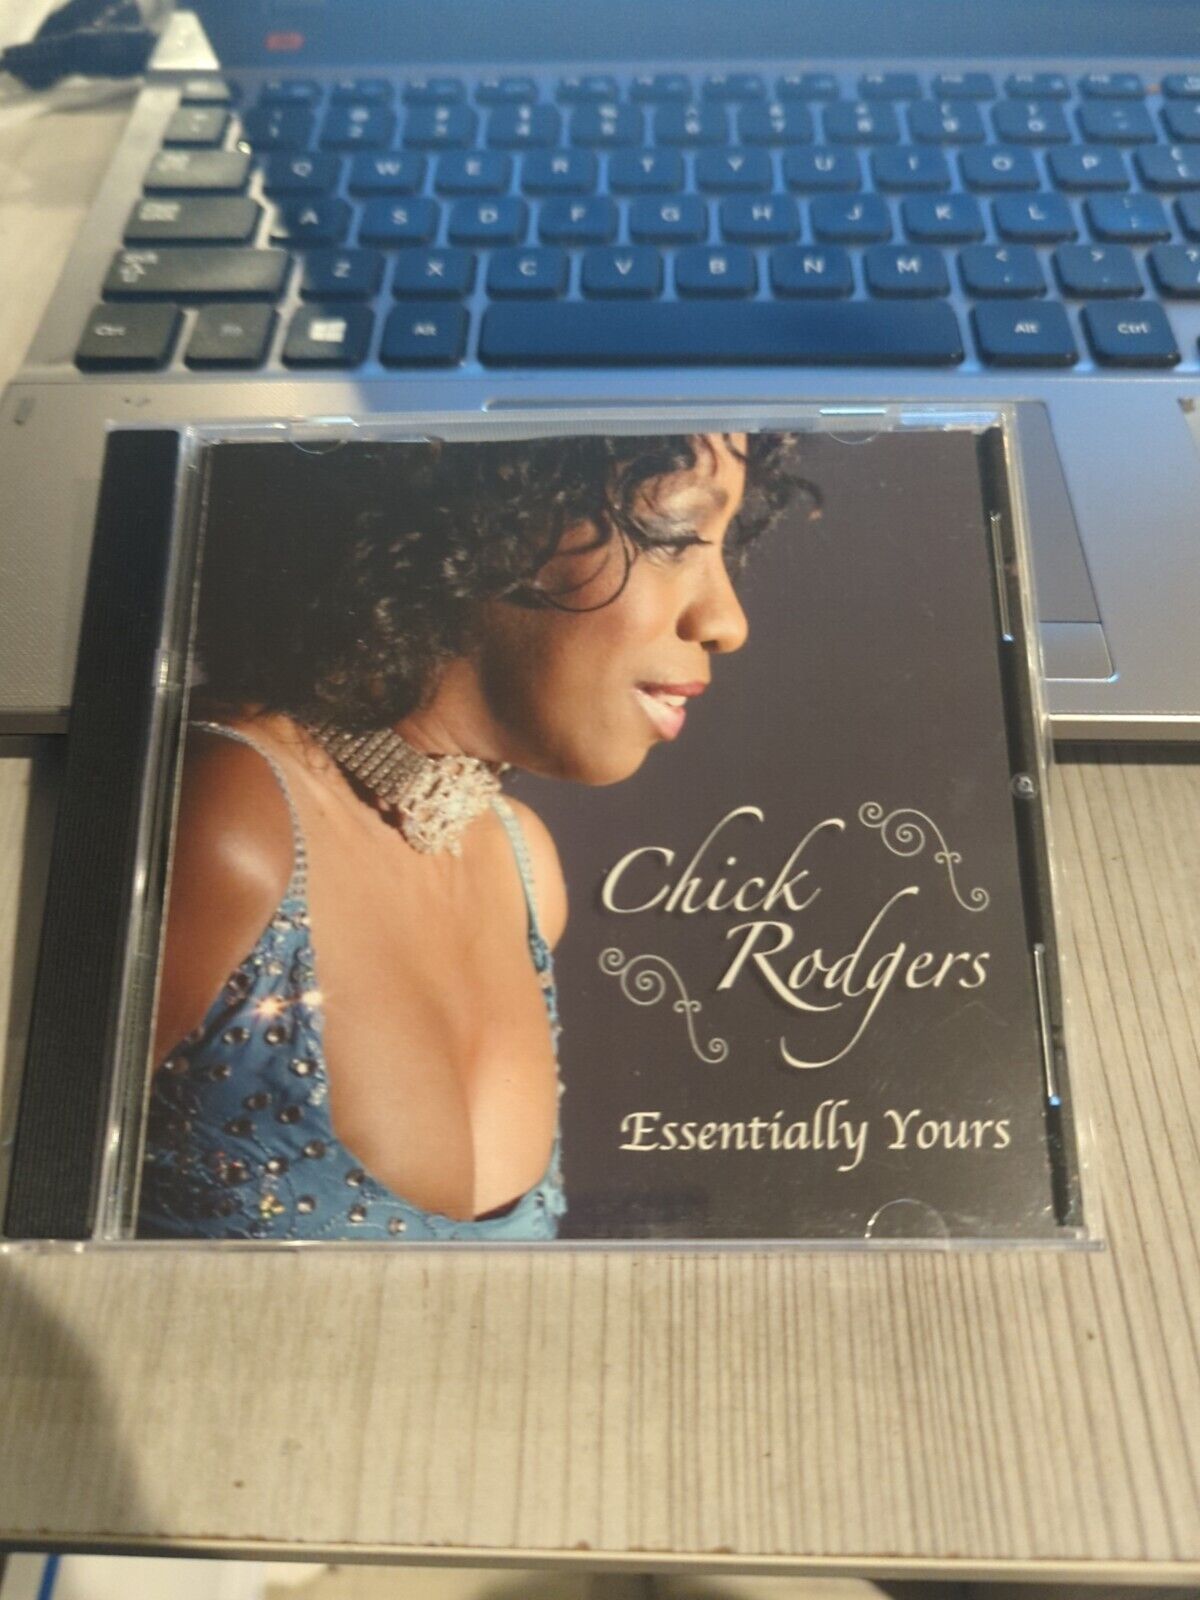 CD 2485 Chick Rodgers - Essentially Yours